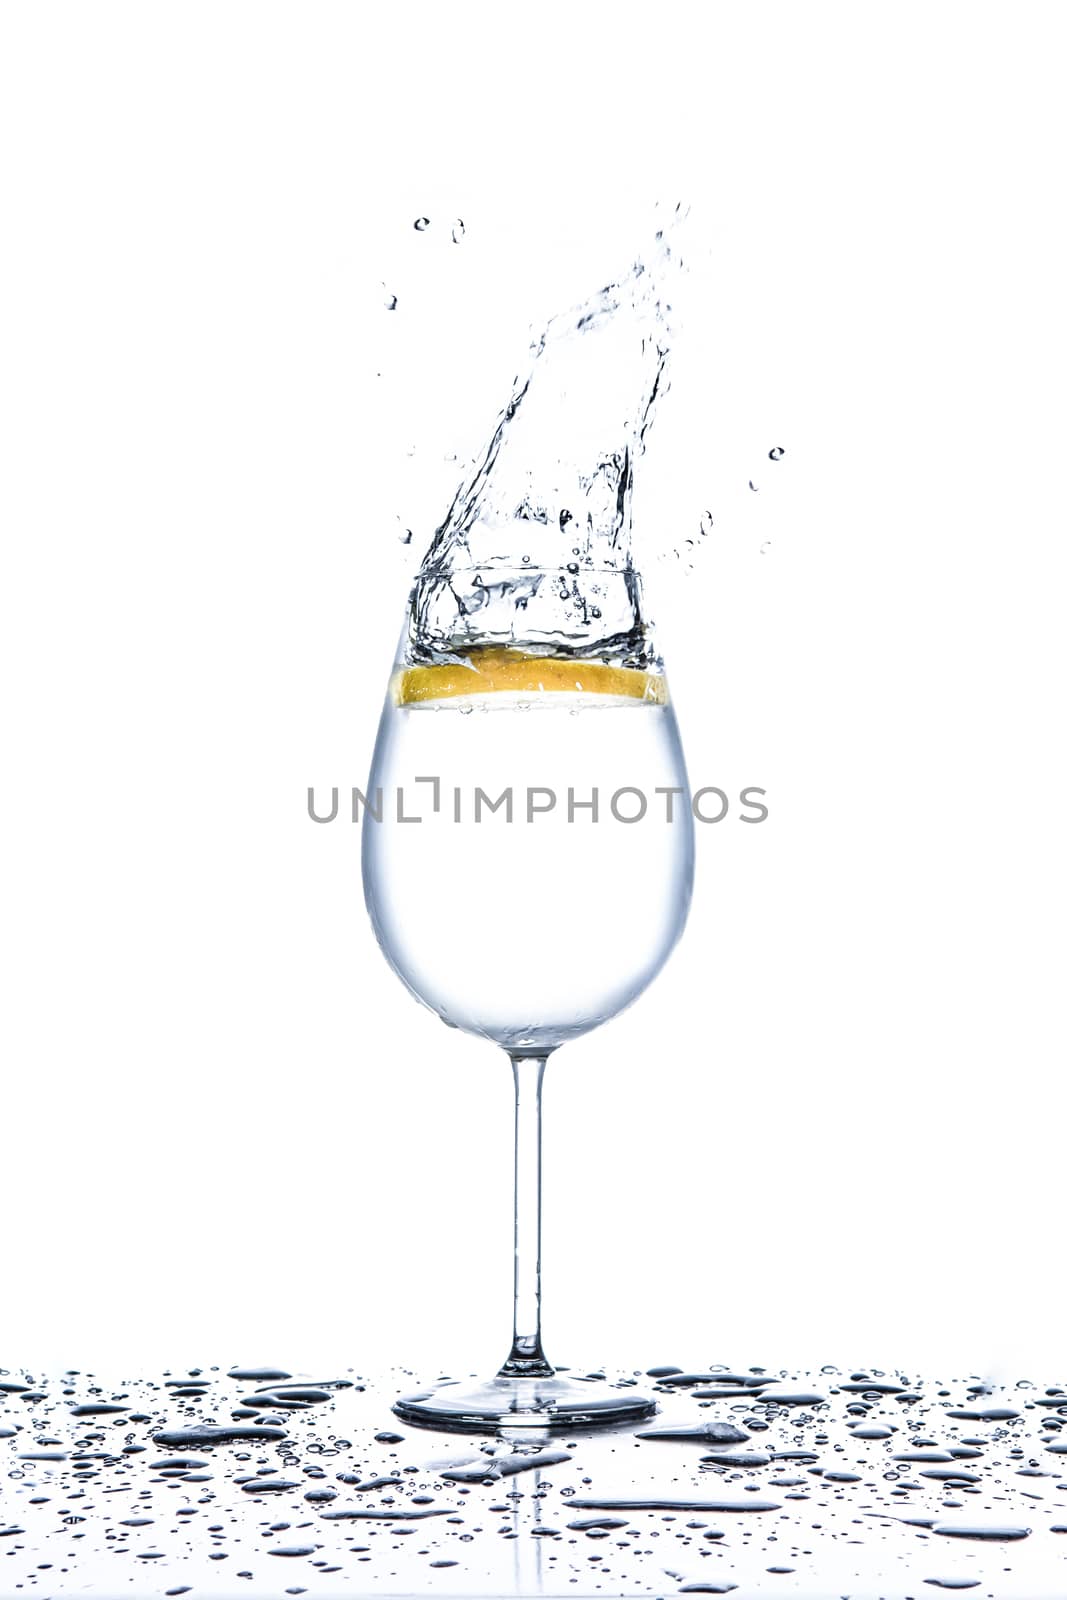 Lemon splashing into glass of water on white background by martinm303